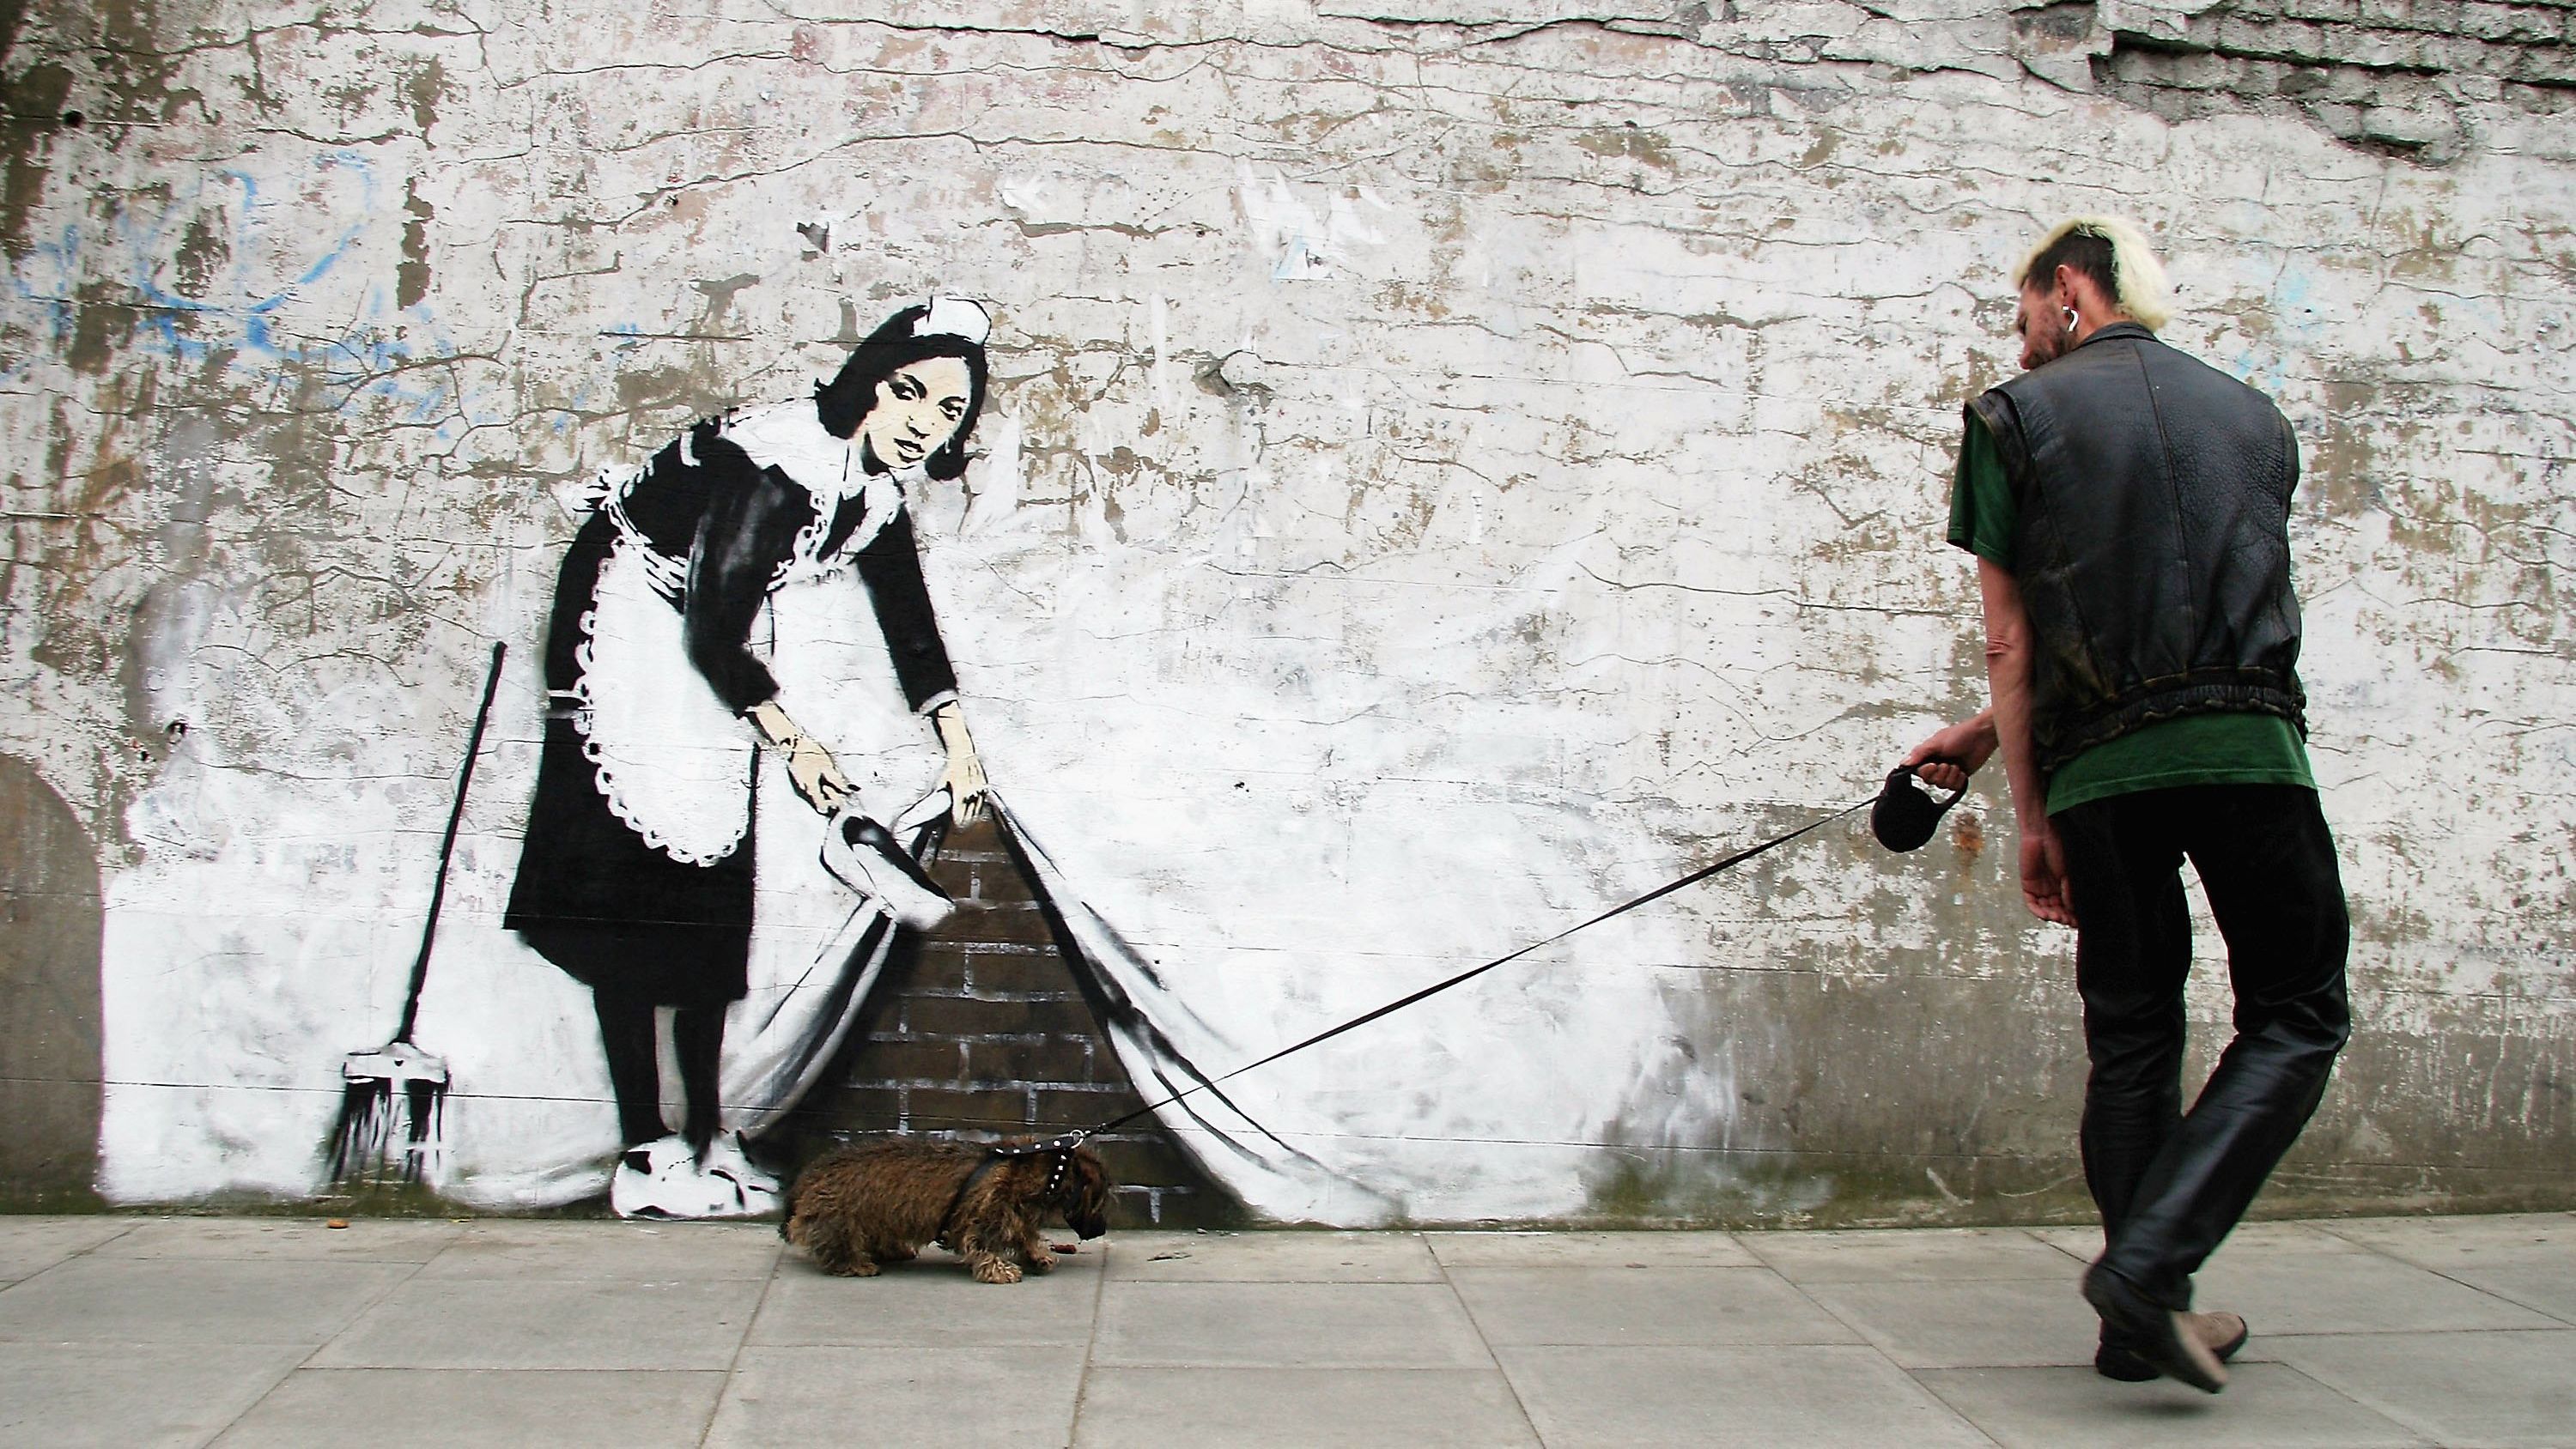 Banksy Artwork Dismantled by Local Authorities Hours After Appearing - WSJ